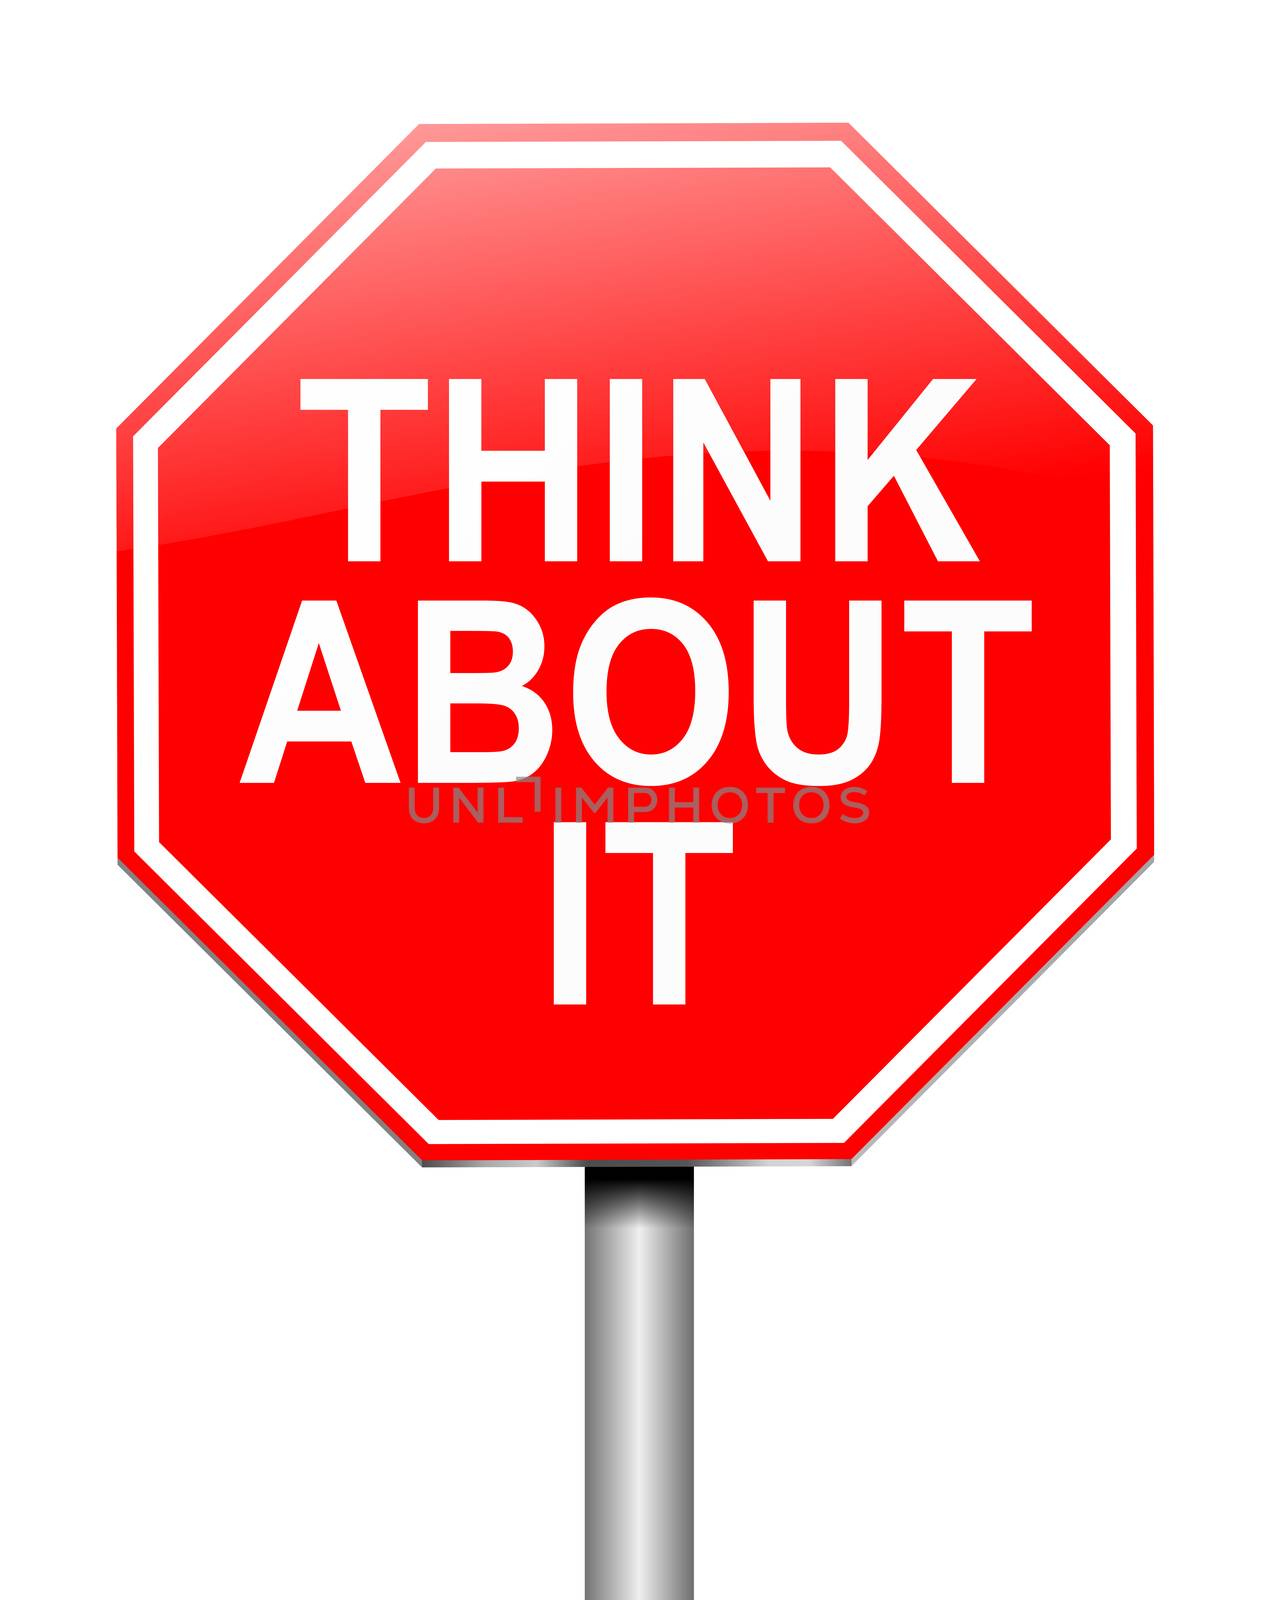 Illustration depicting a sign with a think about it message.